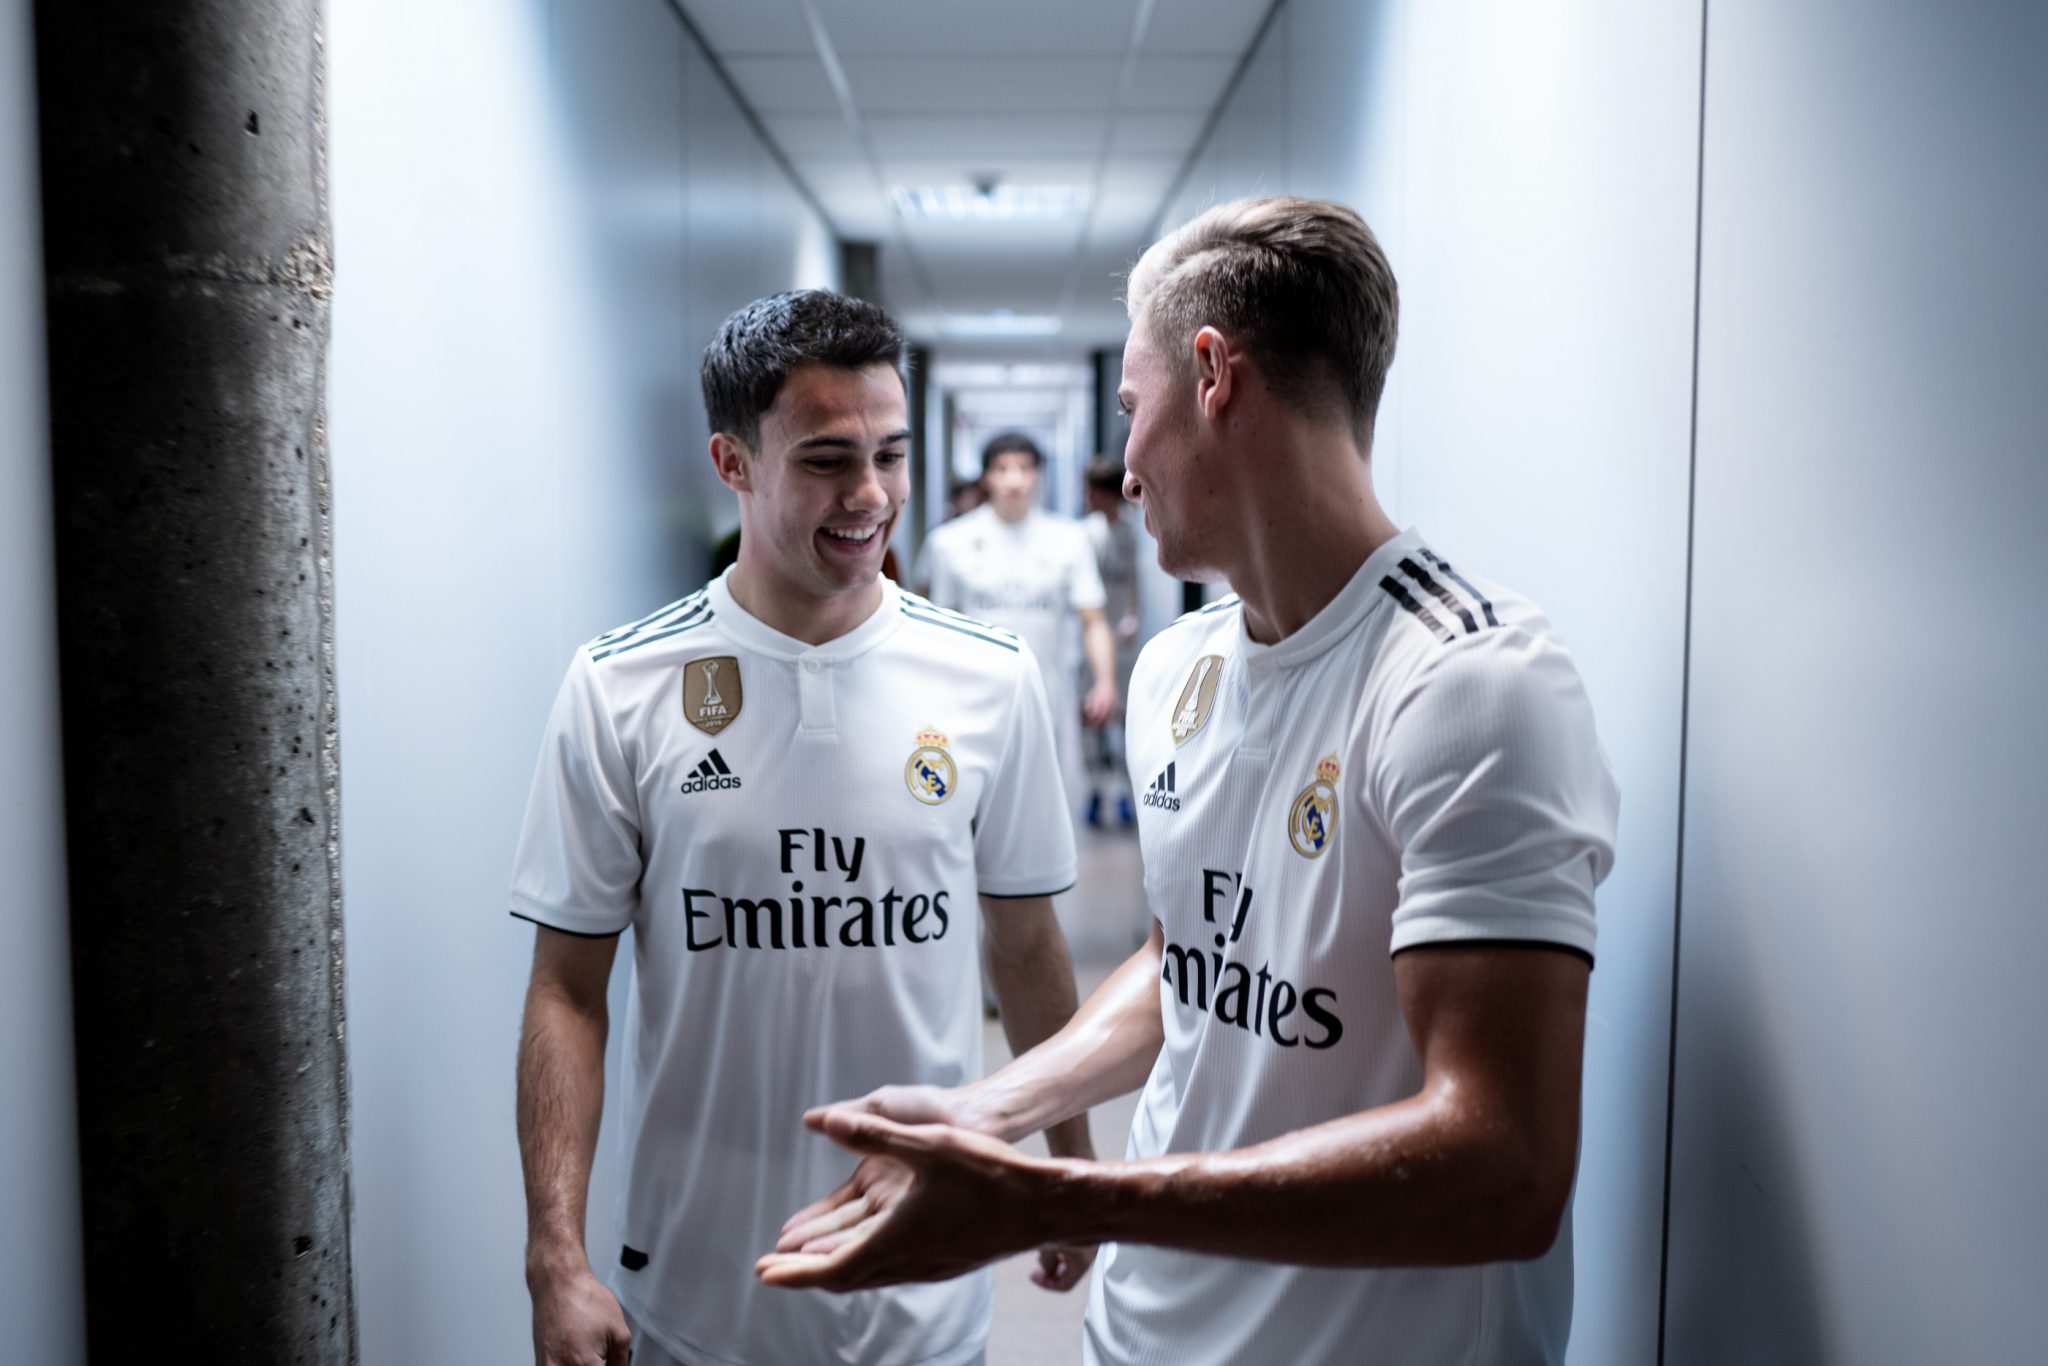 David LaChapelle | Audi x Real Madrid | Behind-the-scenes photographs from the Audi E-tron launch shoot in Madrid. | 12